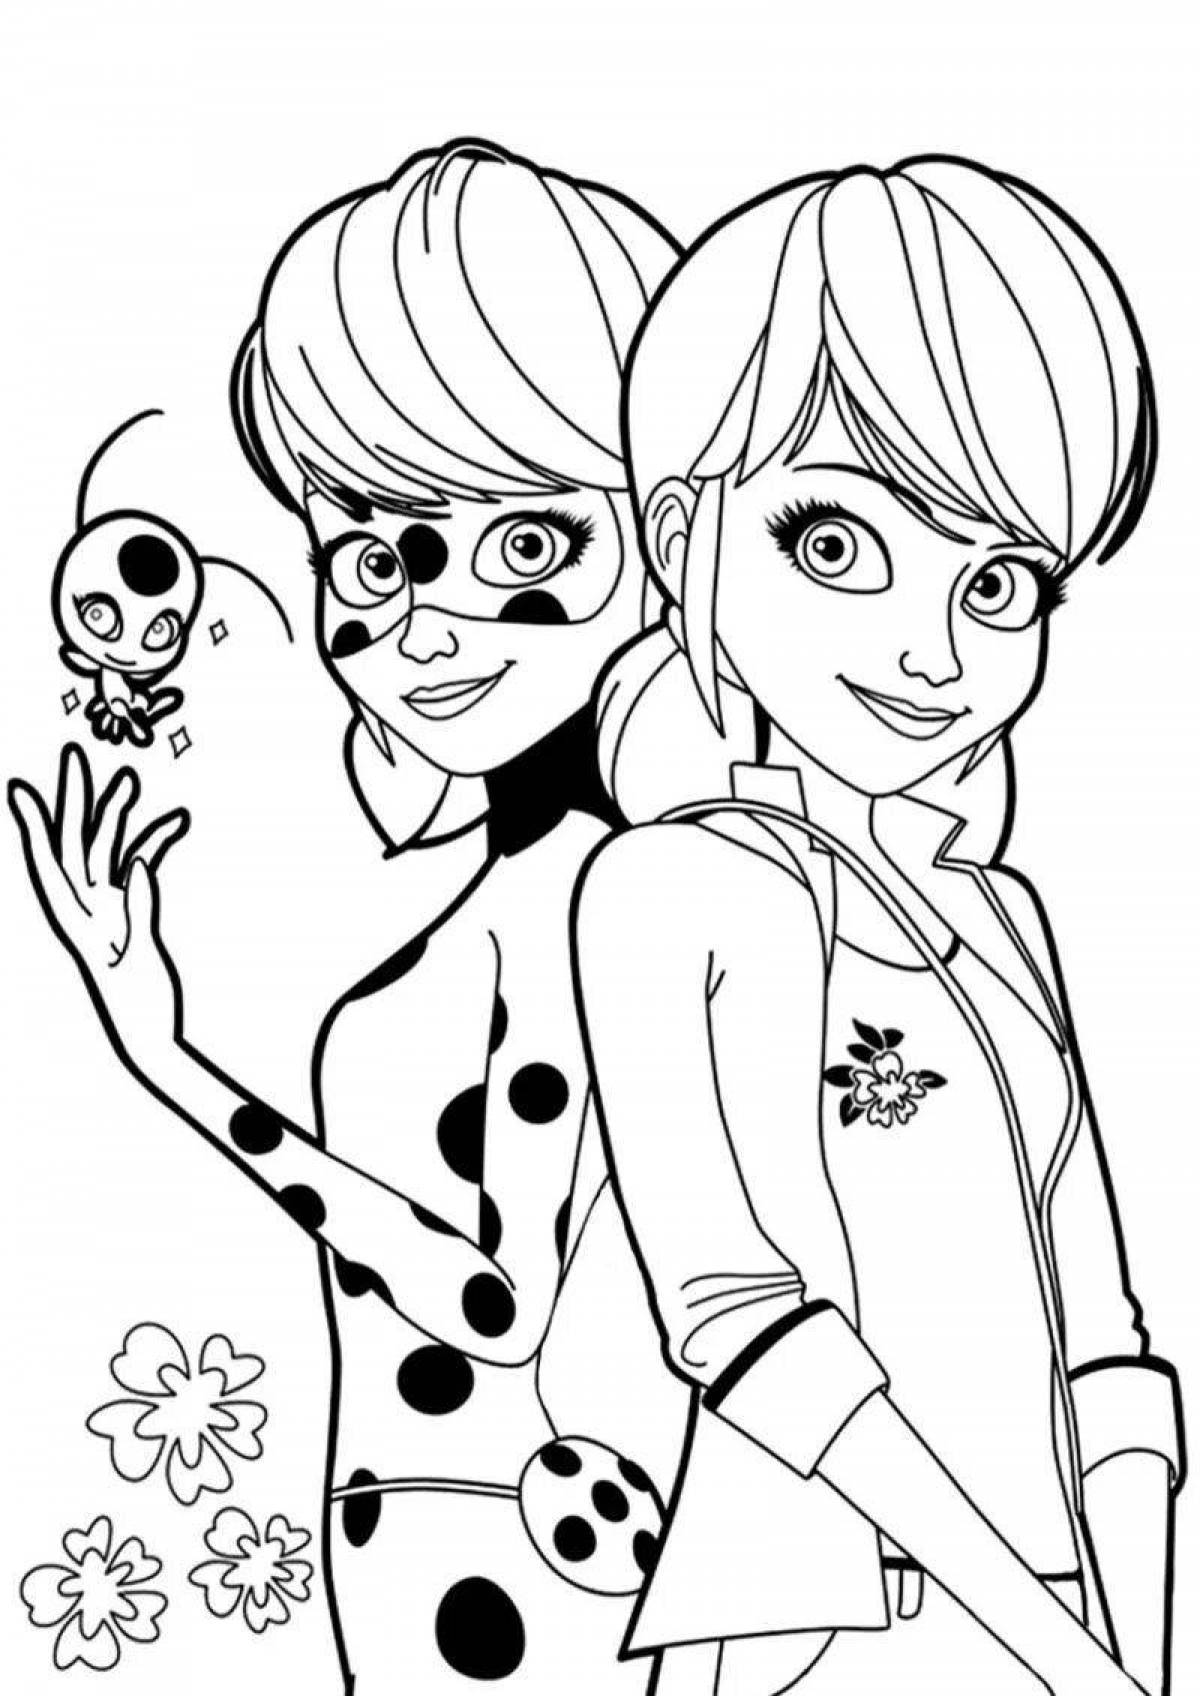 Color explosion ladybug and marinette coloring book